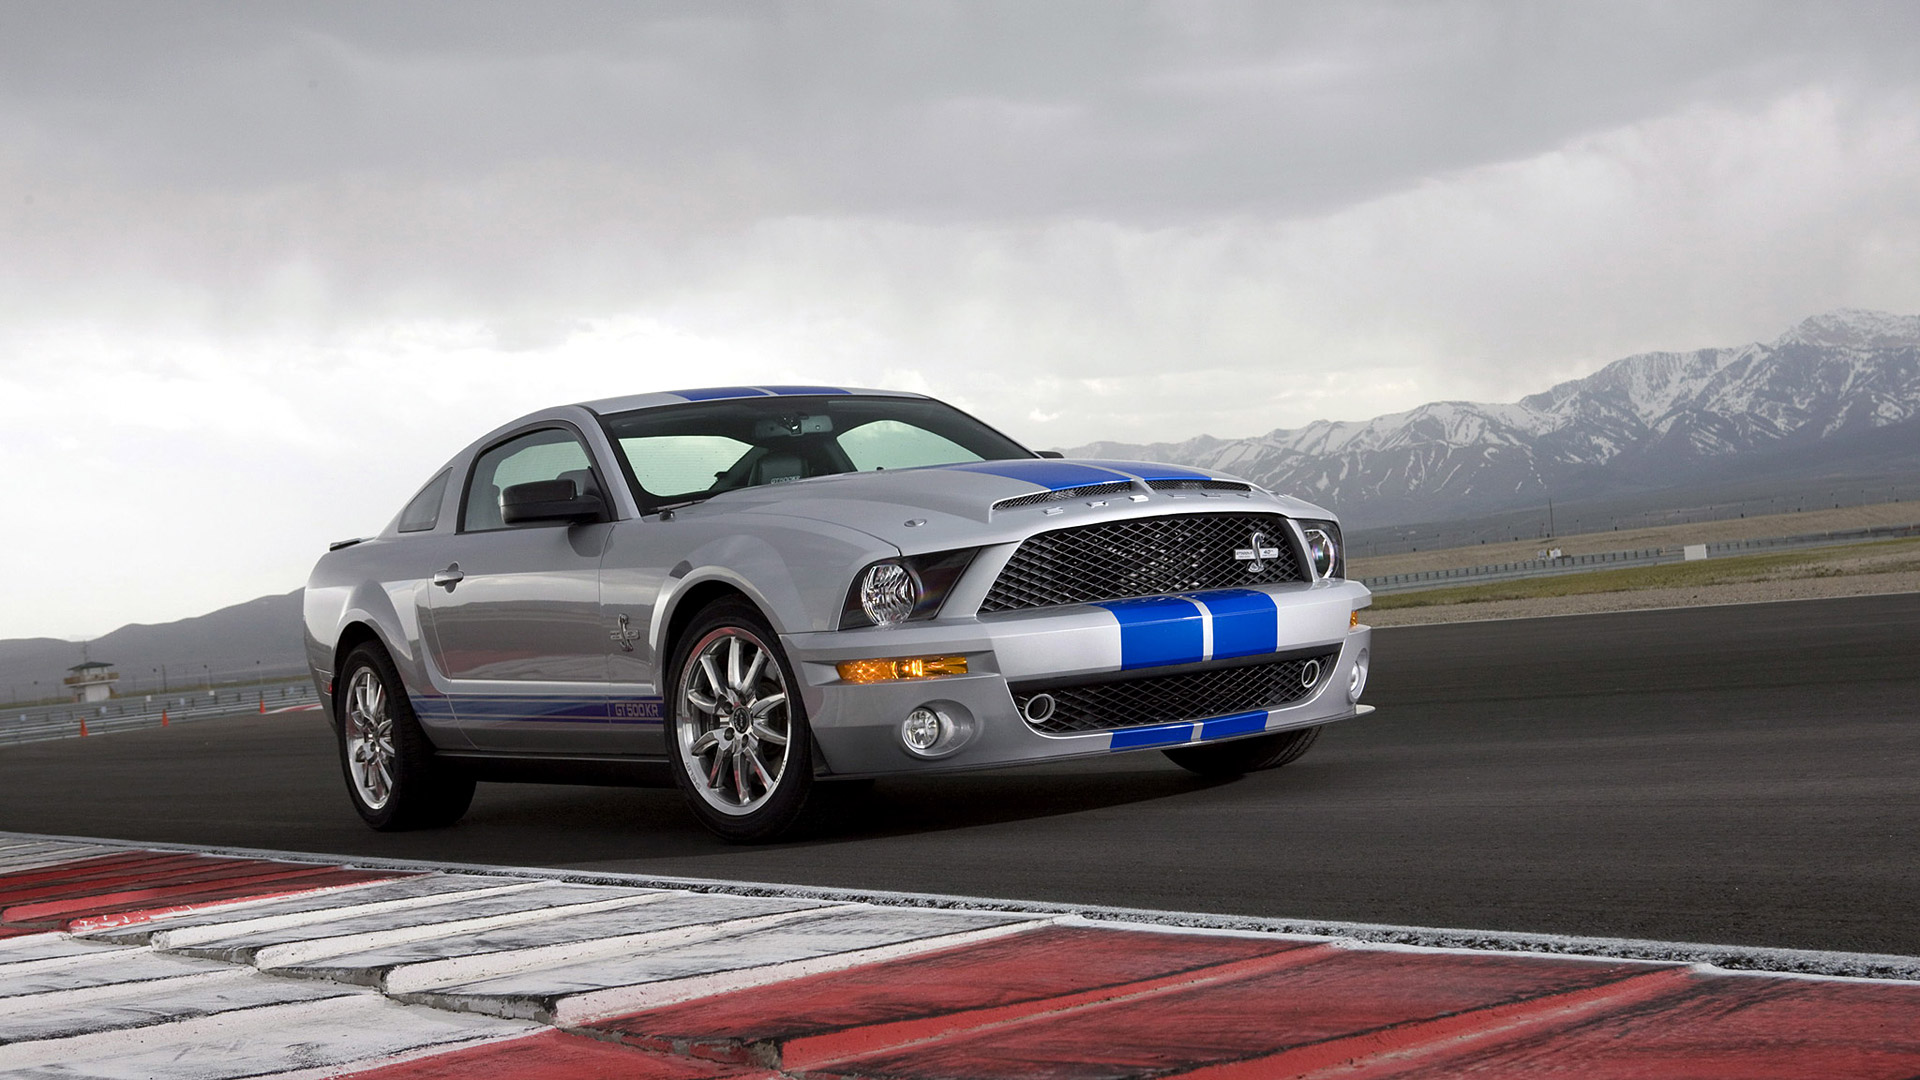 Mustang Of The Day: 2008 Ford Mustang Shelby GT500KR